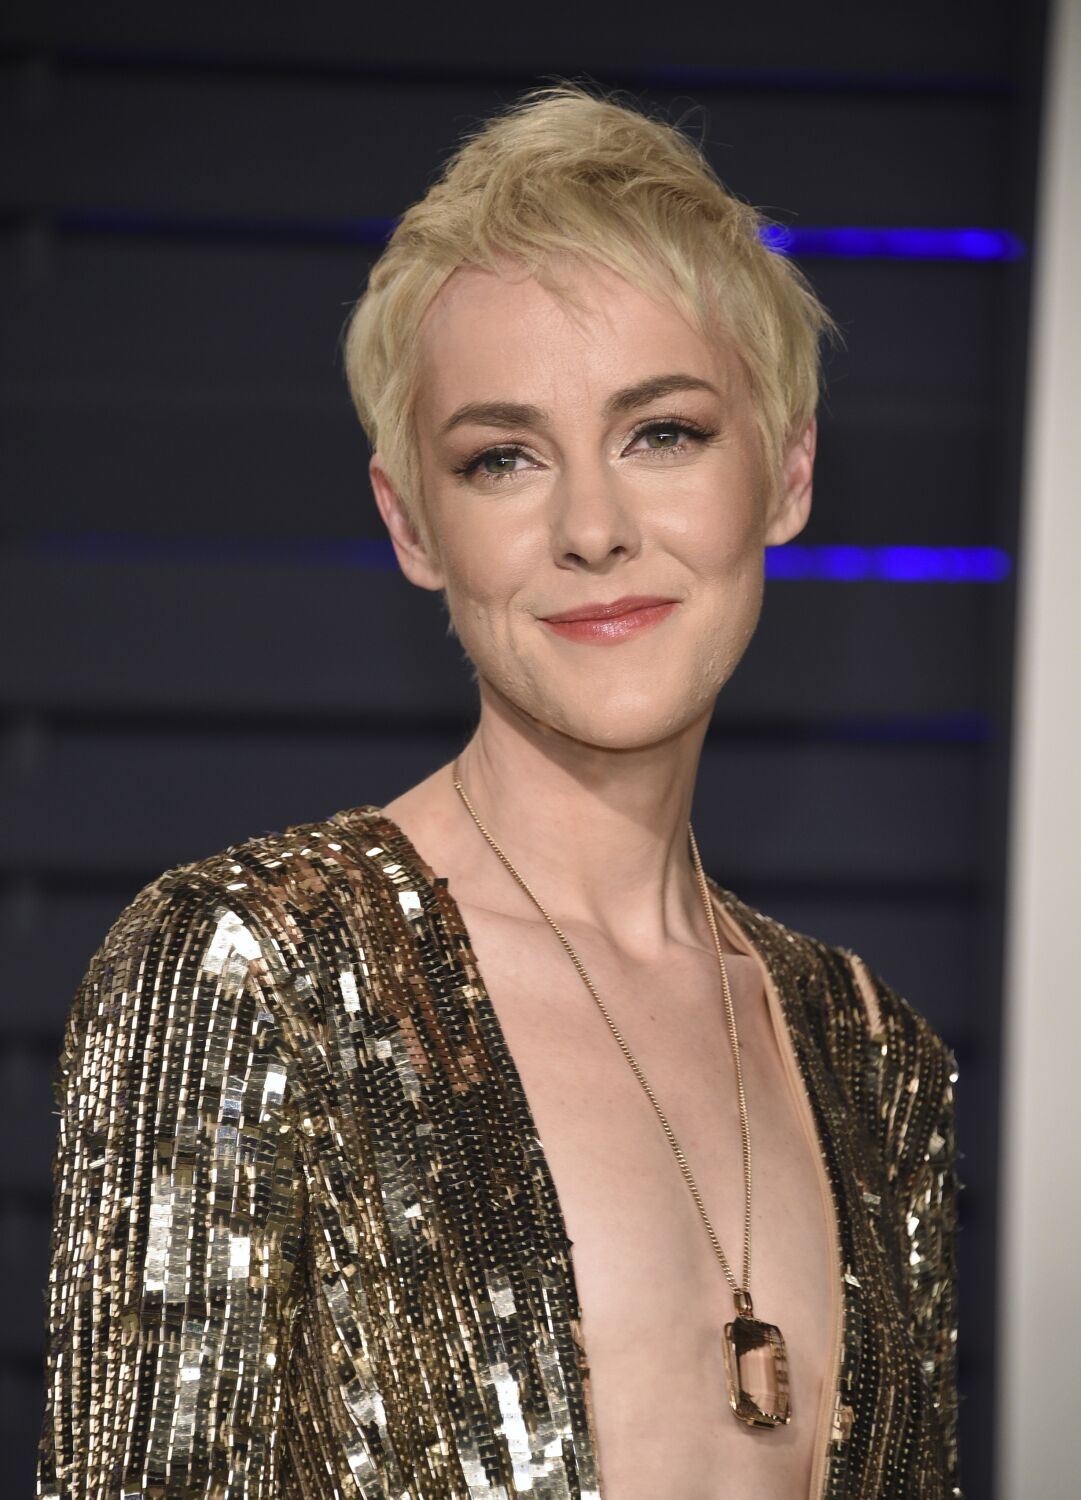 Jena Malone says 'Hunger Games' co-worker sexually assaulted her: 'a traumatic event'